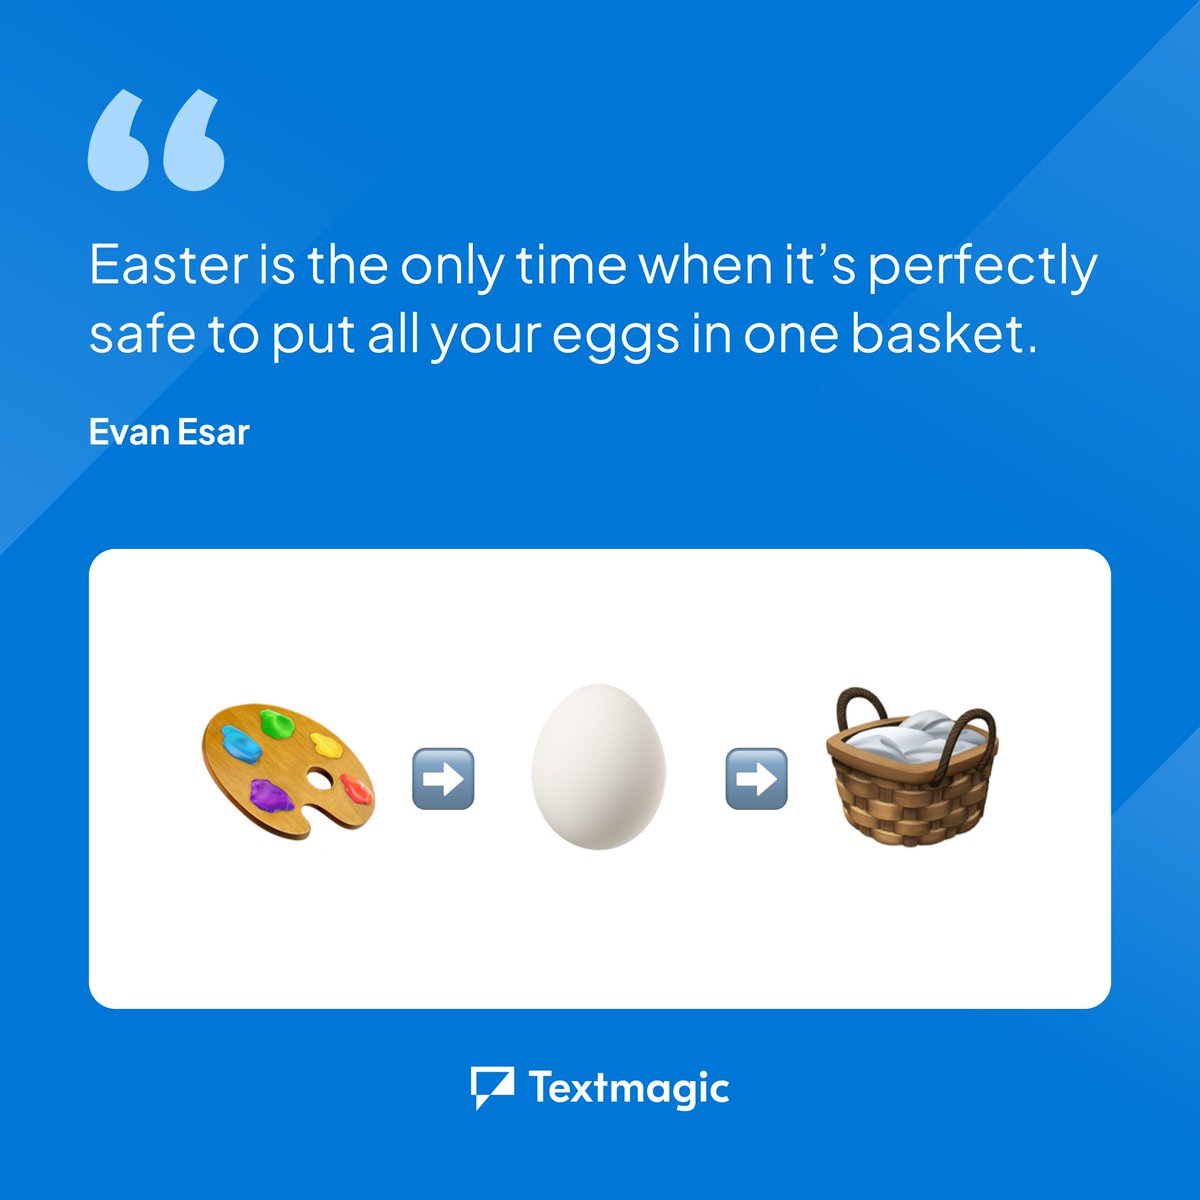 In business as in life, it's wise not to put all our eggs in one basket - except during Easter. So enjoy the egg-ception to the rule and remember to share the holiday cheer! 🥚🧺 

#HolidayFun #Textmagic